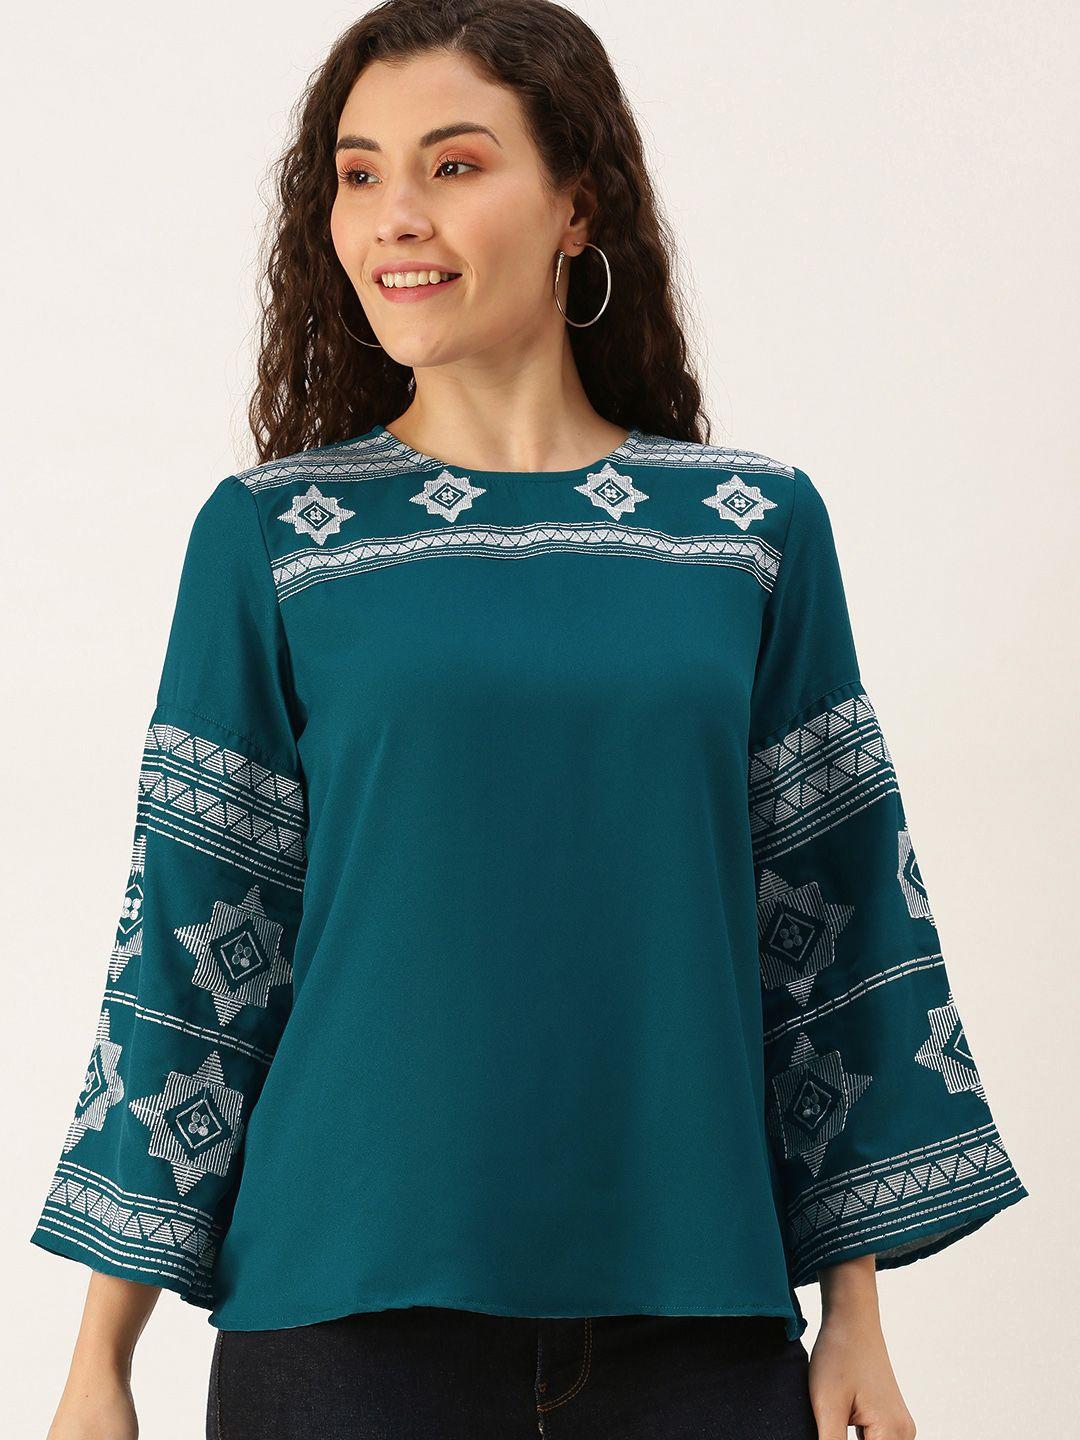 flying machine women teal & white embroidered top